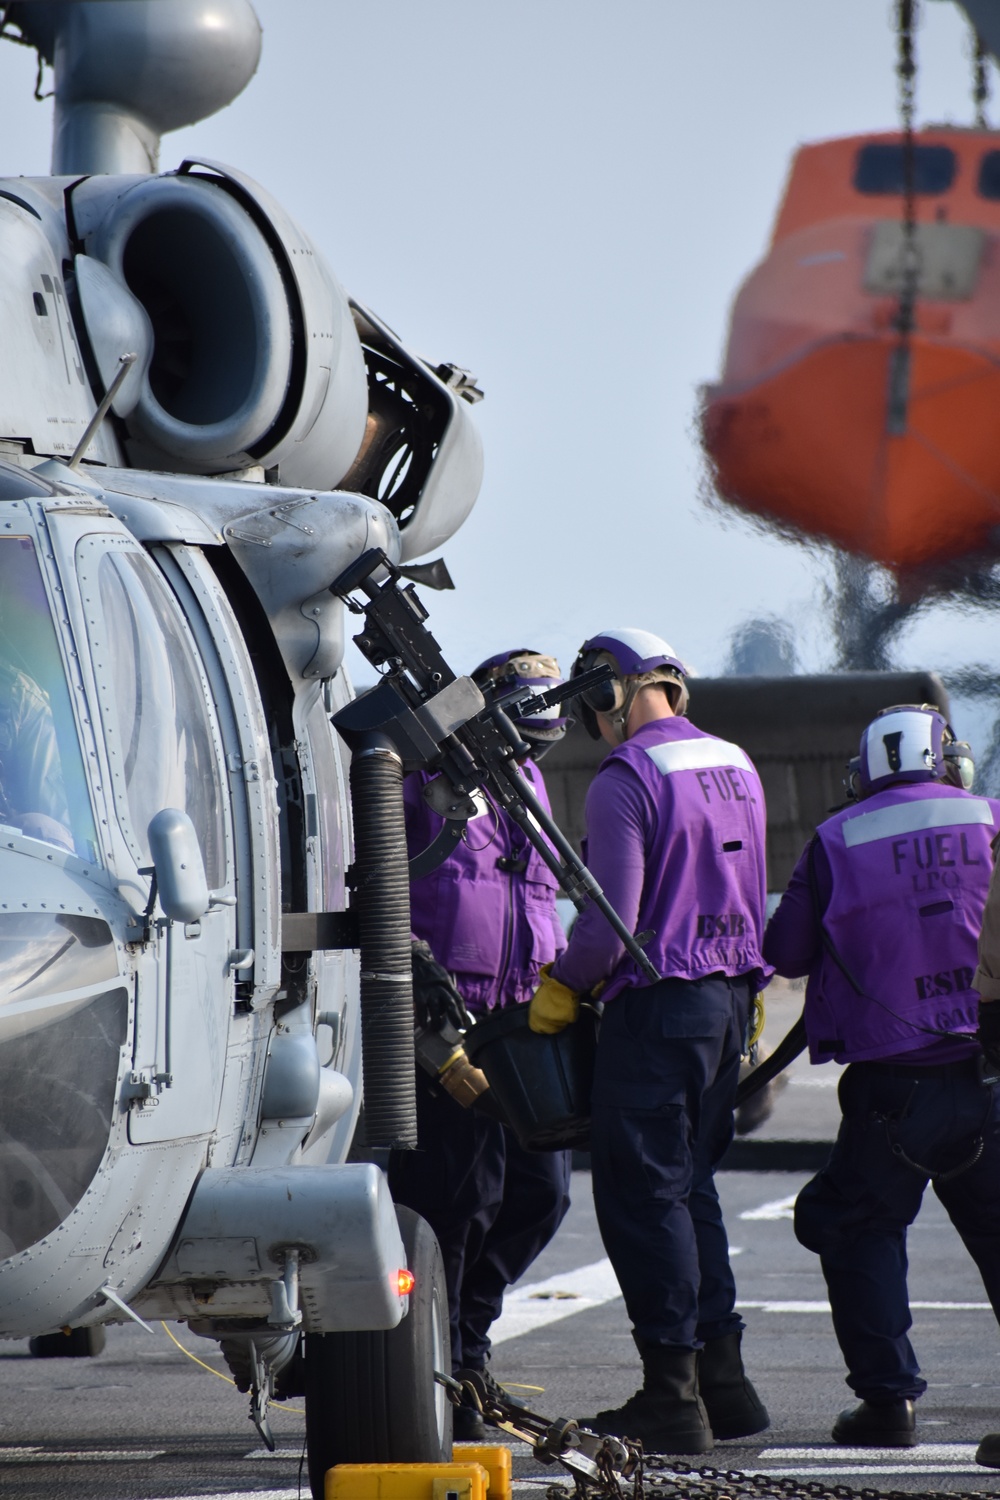 U.S. Navy Aviation Boatswains Mate Fuel (ABF) Sailors refuel an MH-60 Helicopter aboard USS Lewis B. Puller